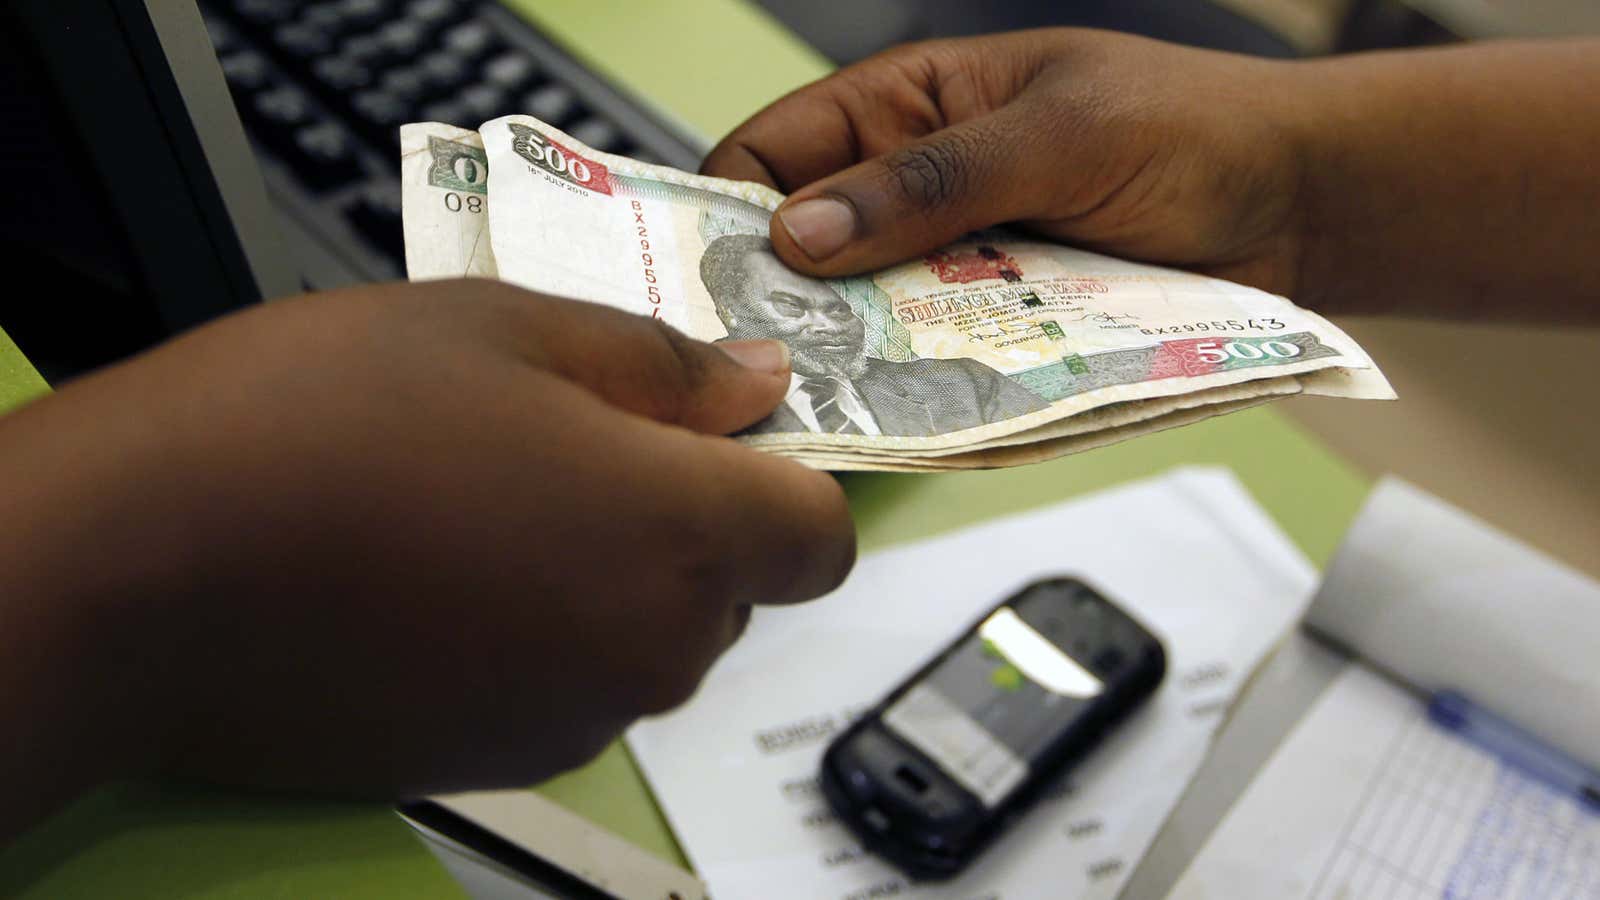 A customer conducts a mobile money transfer, known as M-Pesa.